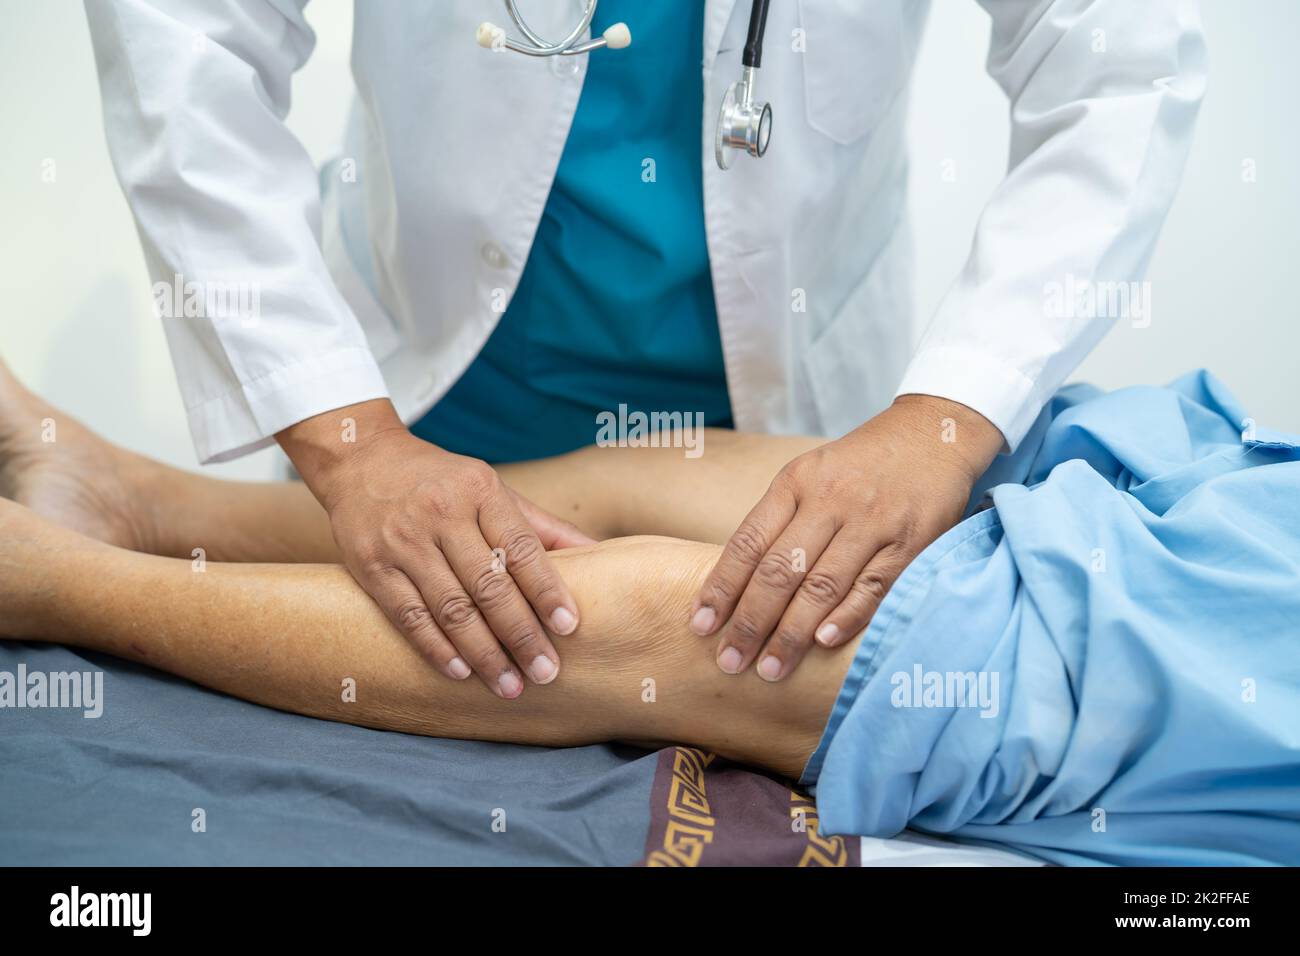 Asian doctor physiotherapist examining, massaging and treatment knee and leg of senior patient in orthopedist medical clinic nurse hospital. Stock Photo